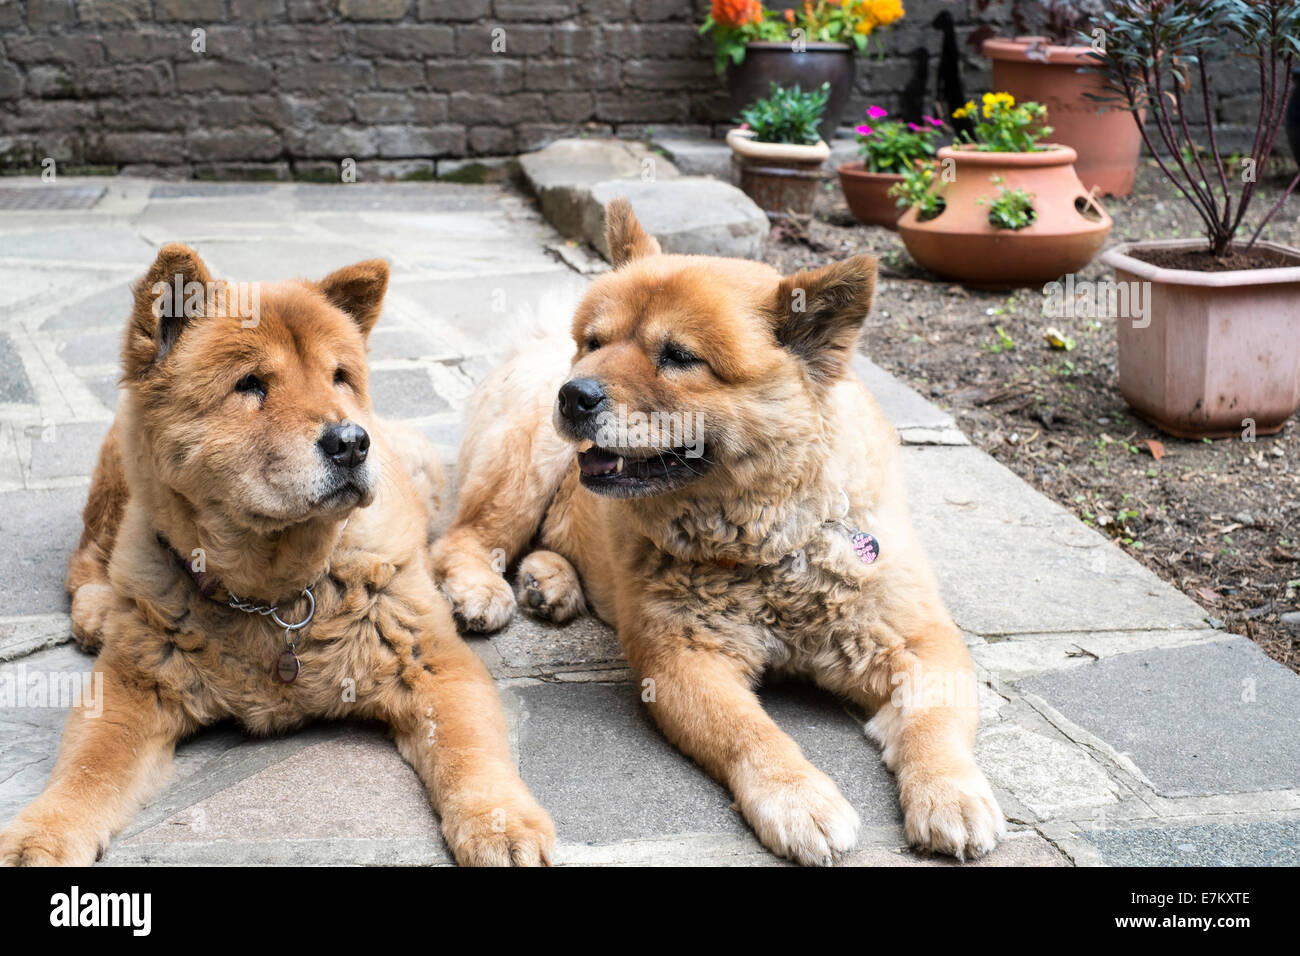 Chow Chow two dogs in a garden Stock Photo